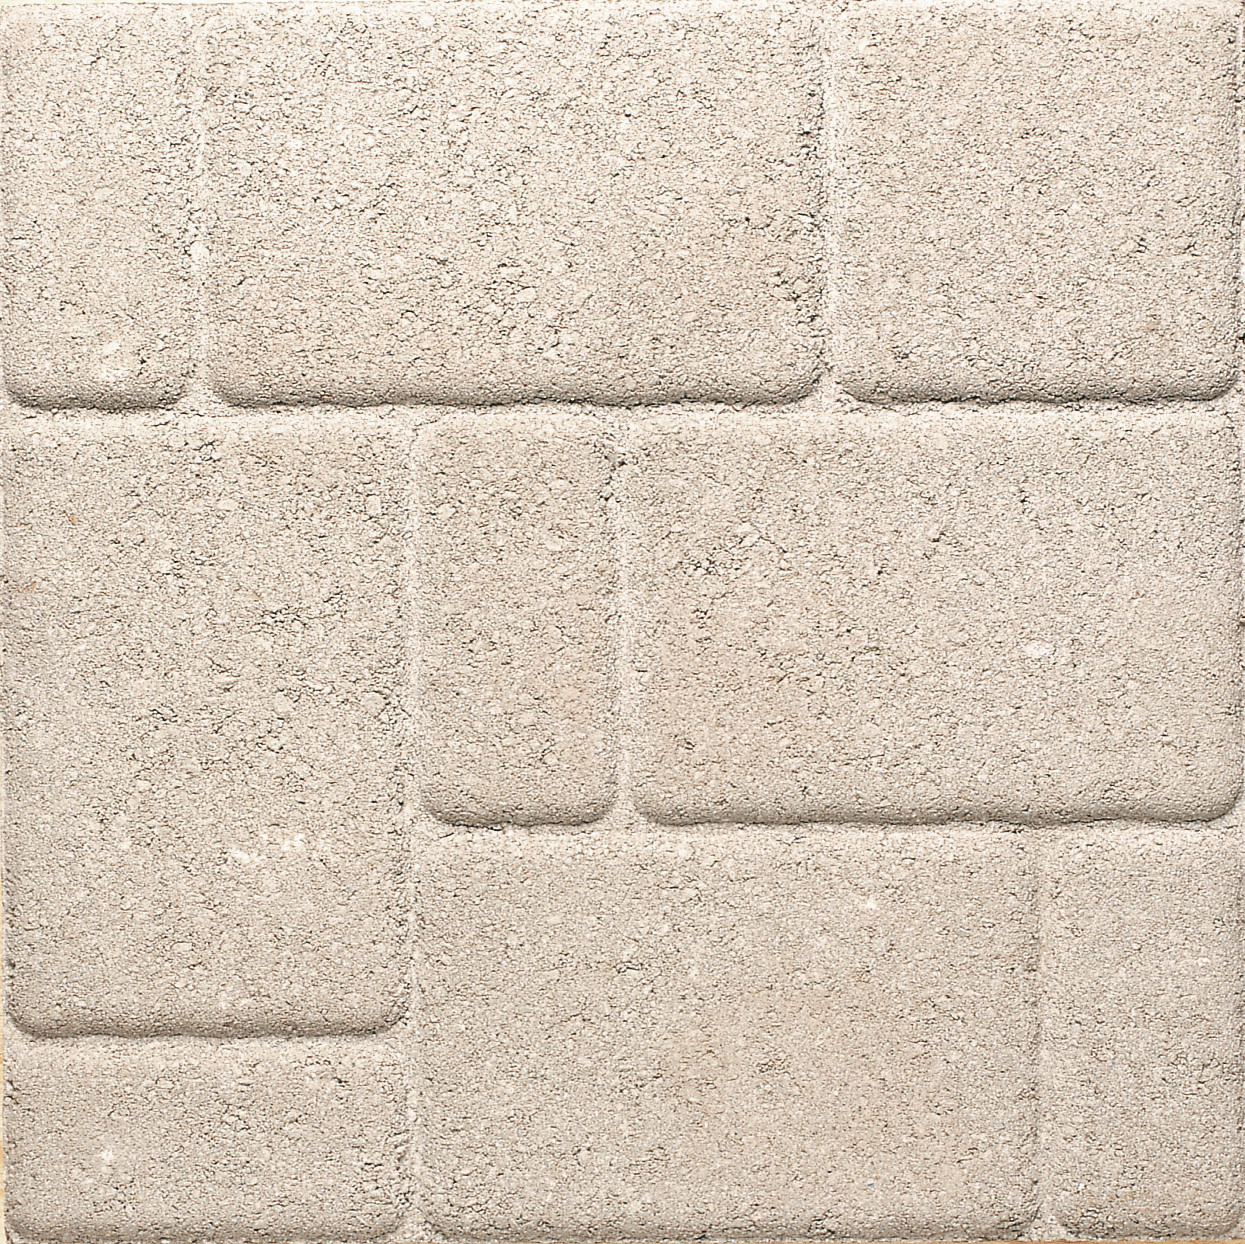 Image Permacon Patio Plus slabs 16in x 16in x 1 1/2in - Grey